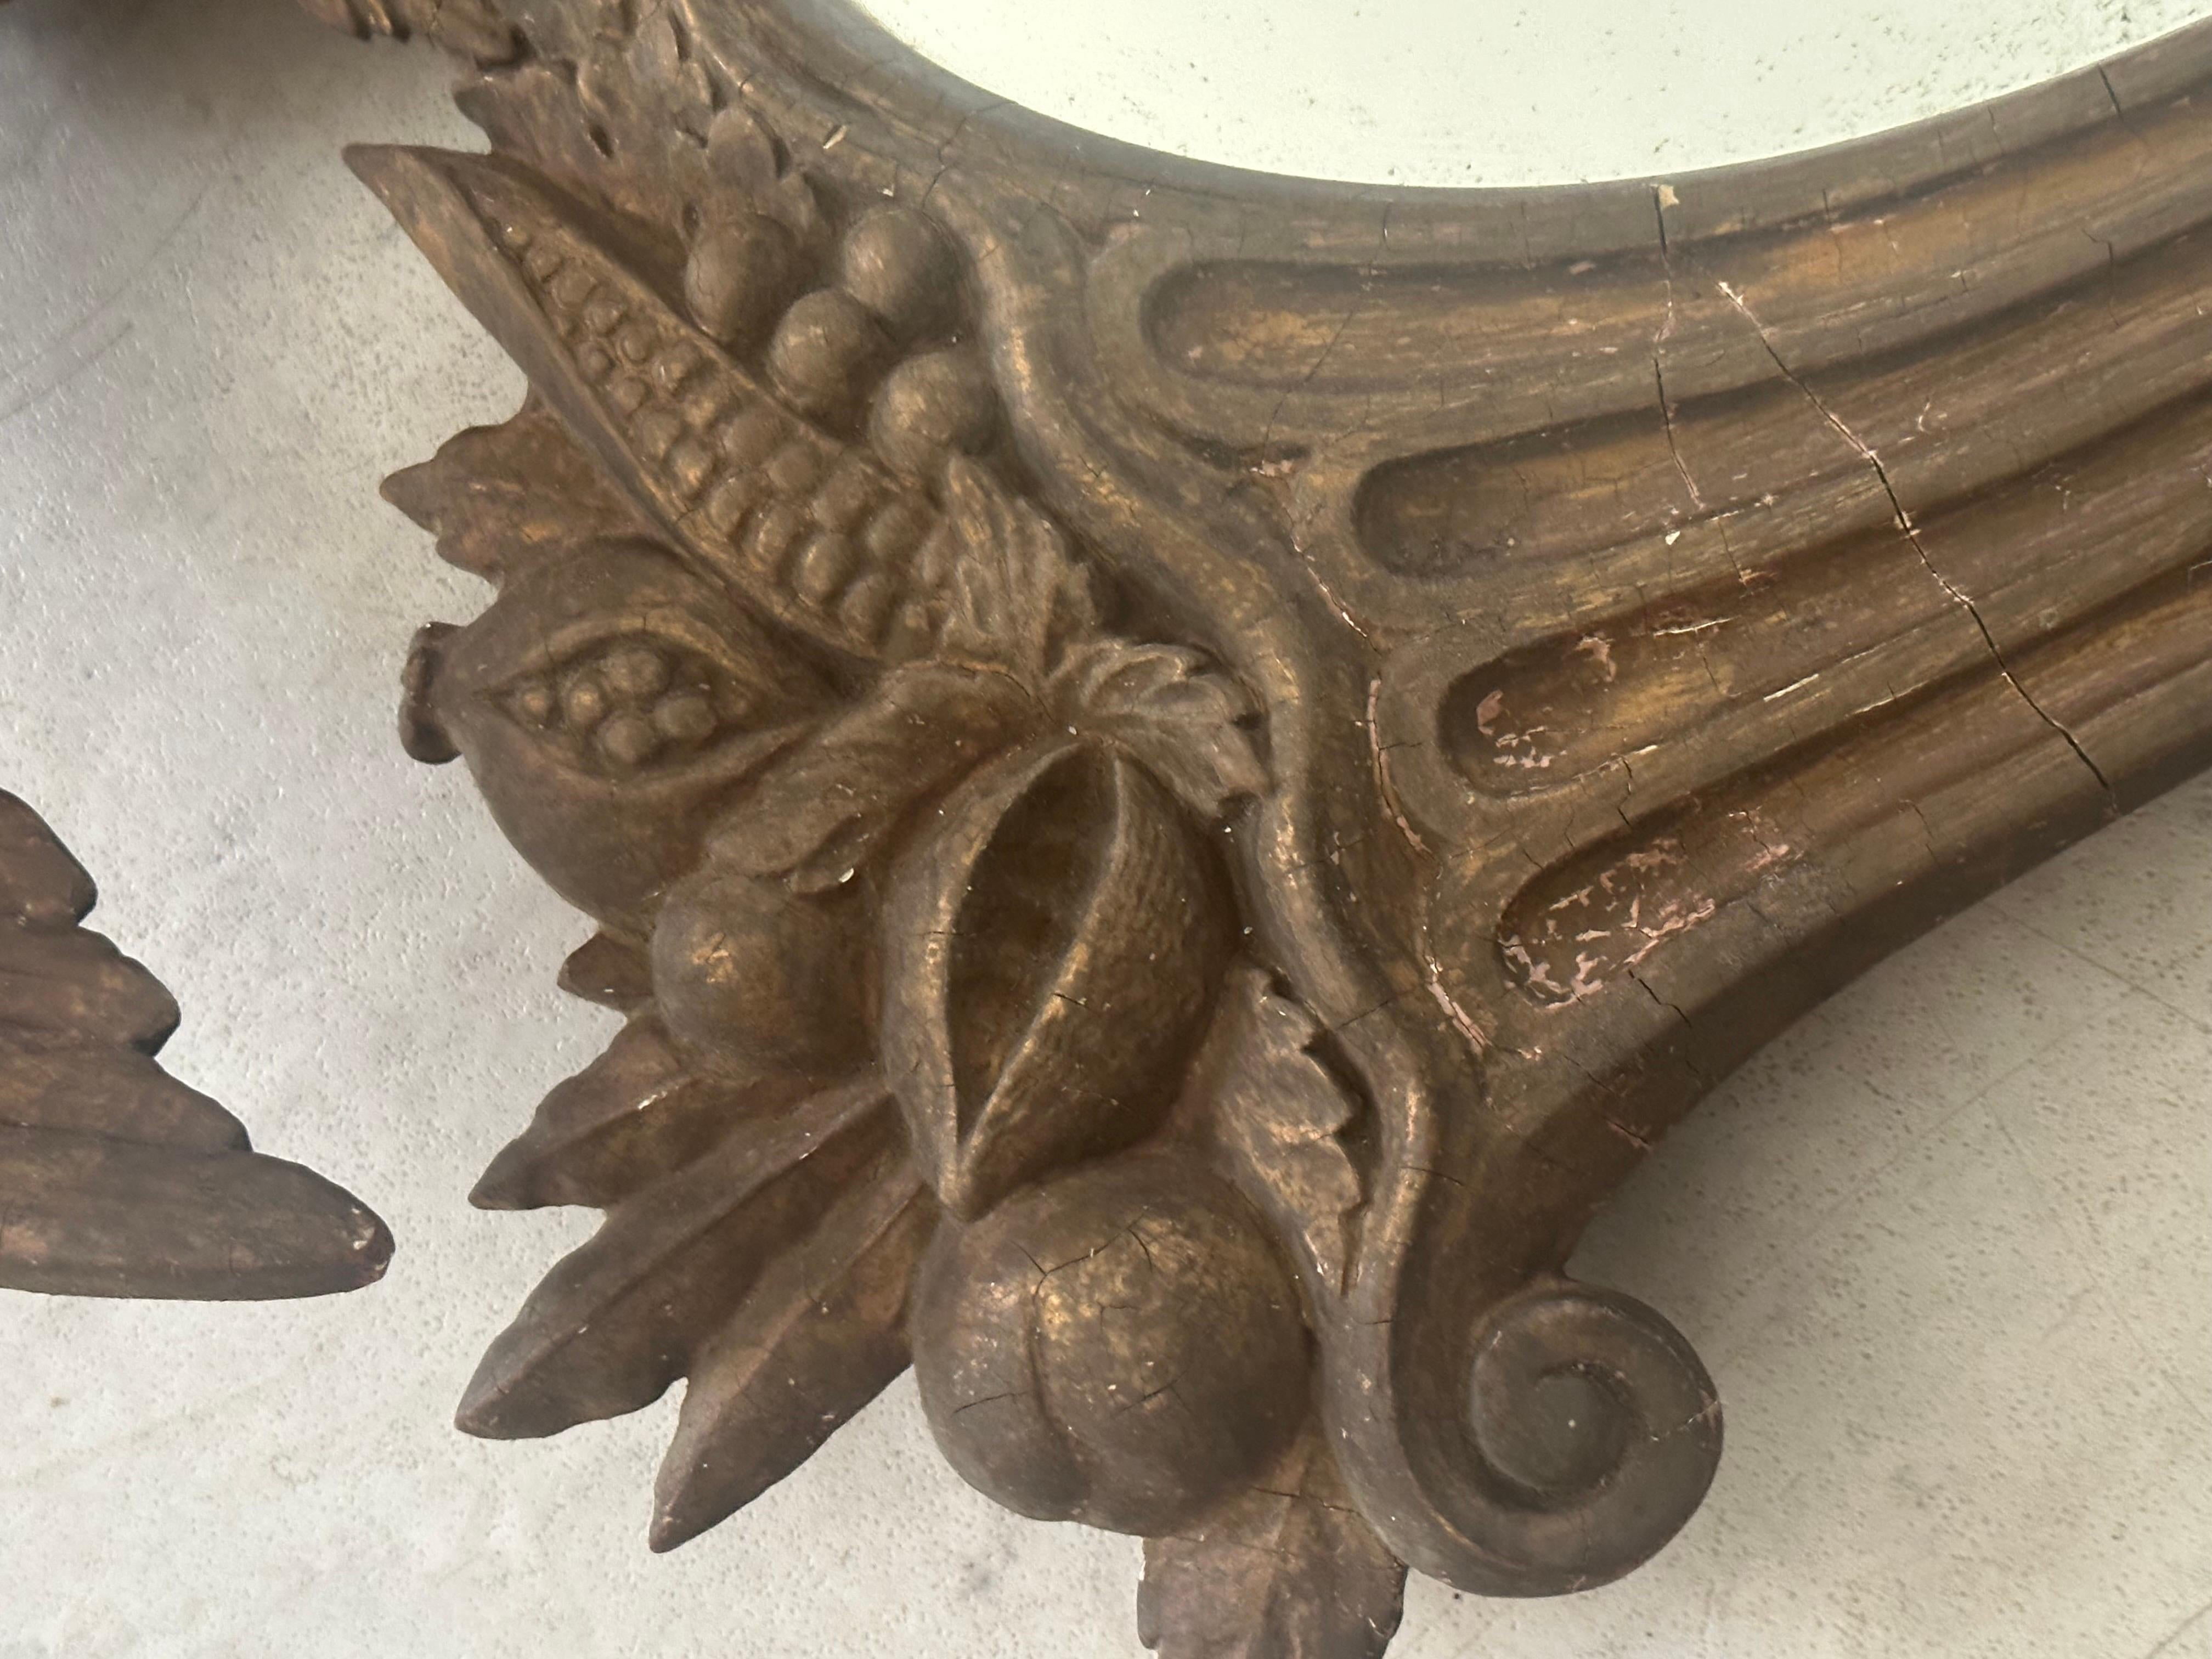 19th century federal style mirror, hand carved and intact, two cornucopias filled flanking either side of the eagle. 

Classic design element of the federal period (much like the convex mirror but without the distorted mirror)